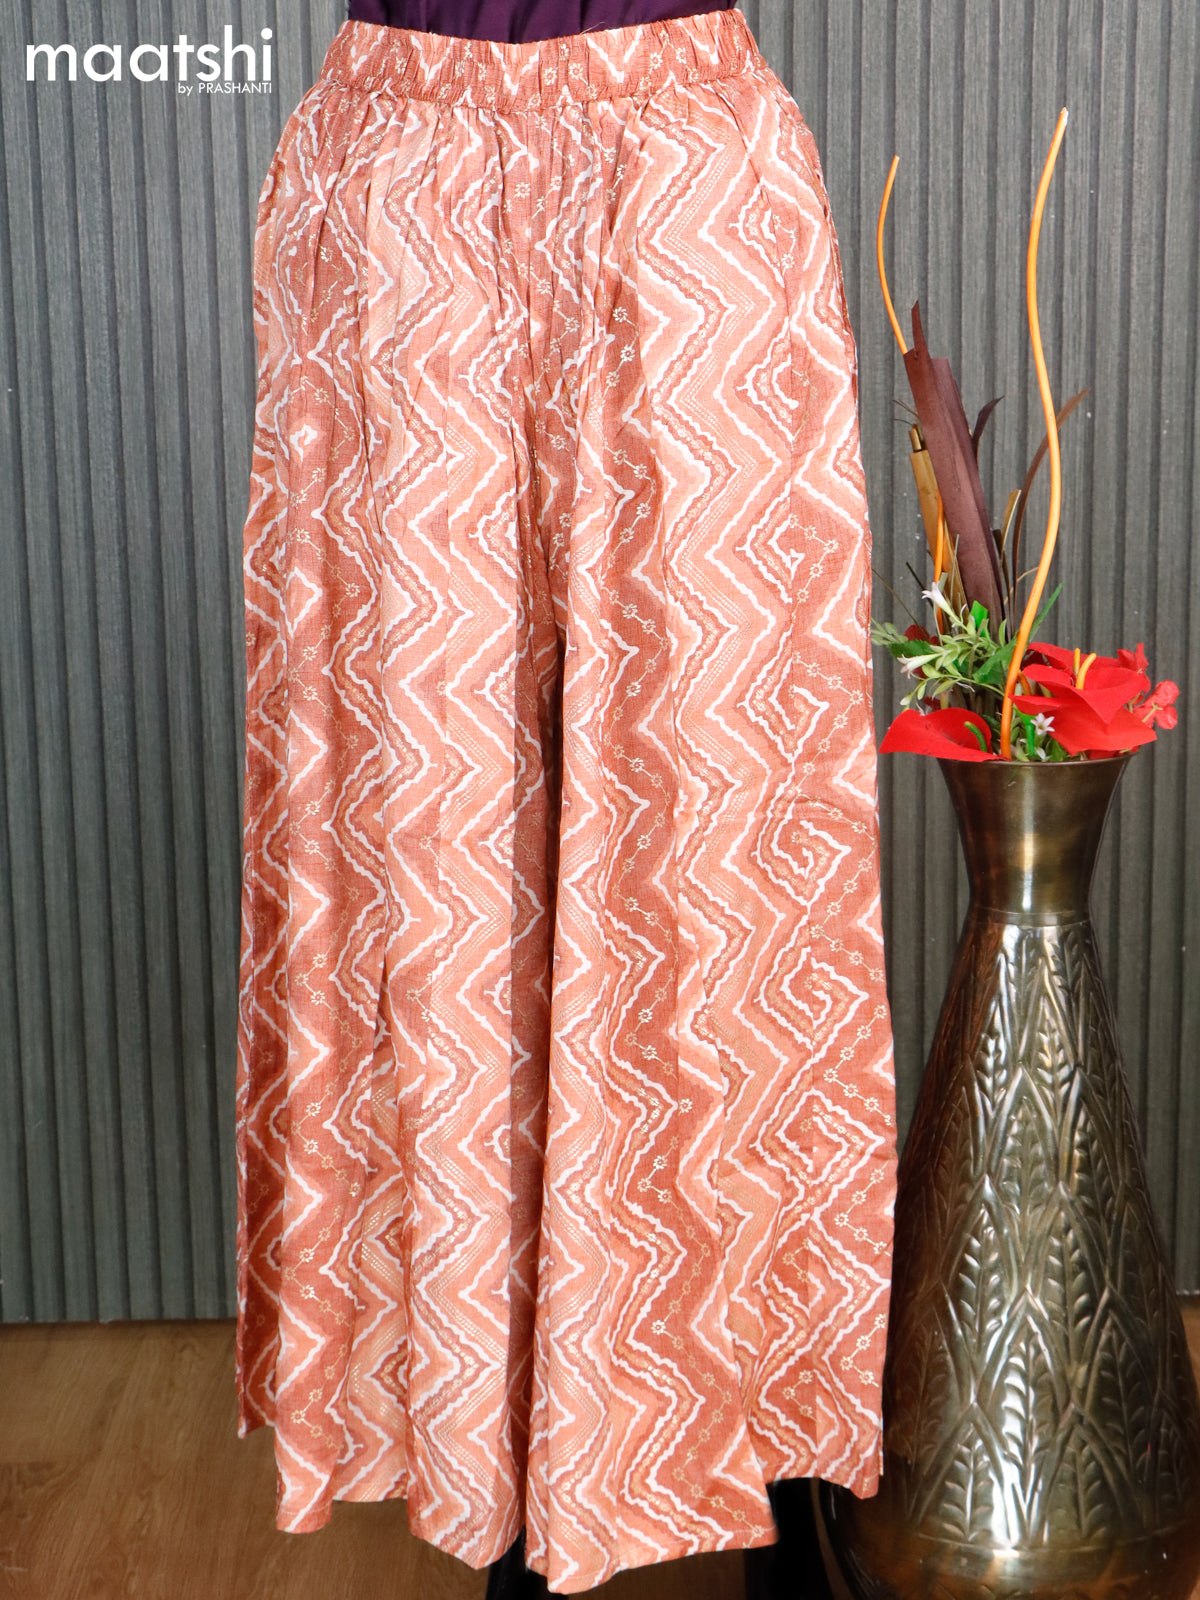 Rayon elephant palazzos pants rust shade and off white with allover zig zag prints - free size